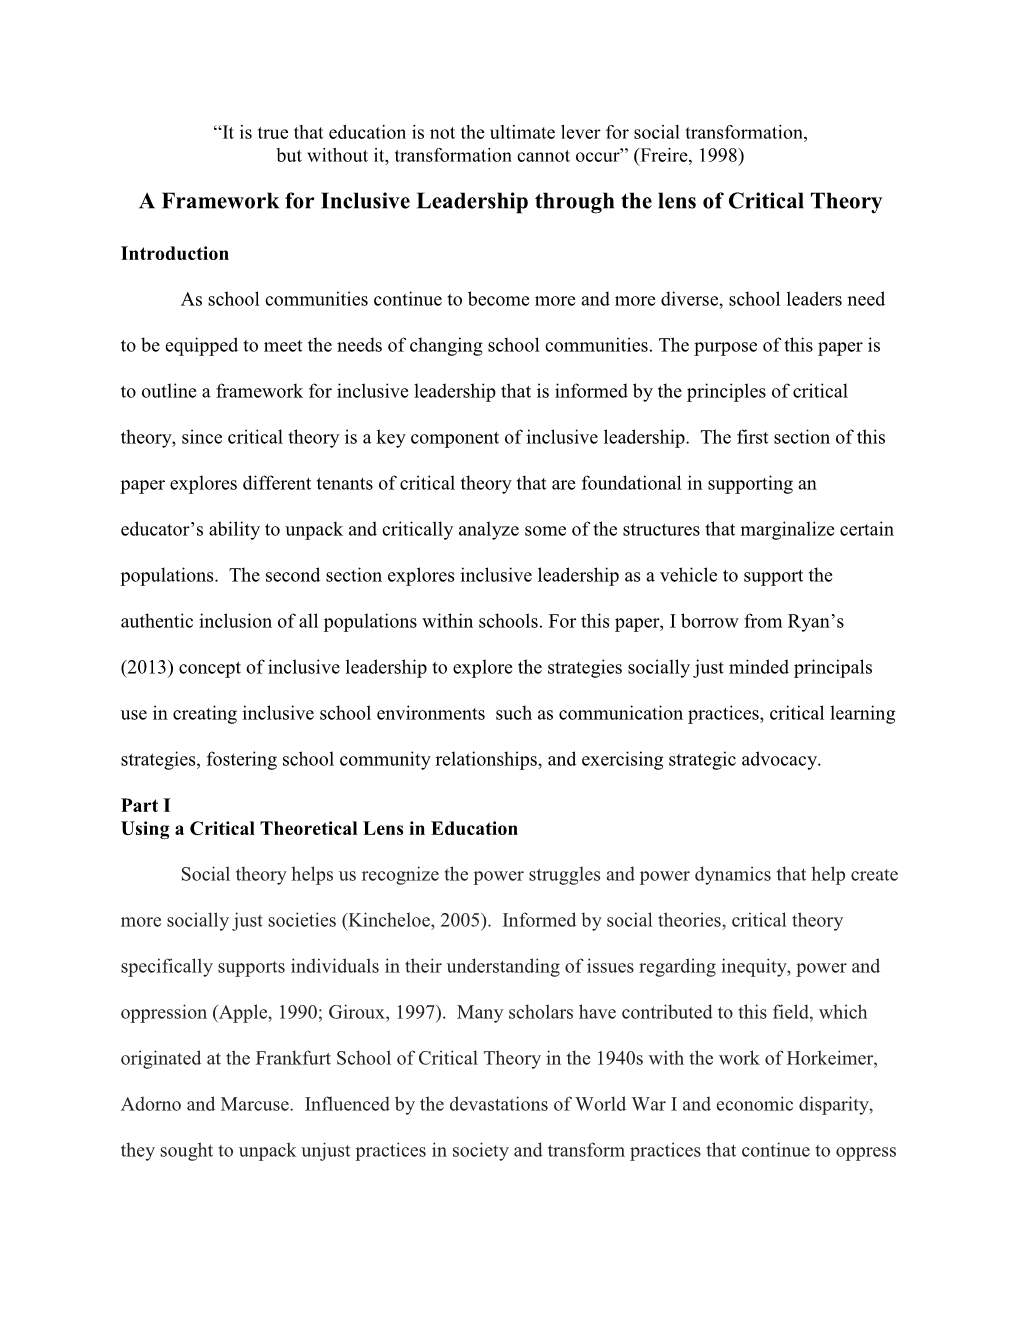 A Framework for Inclusive Leadership Through the Lens of Critical Theory